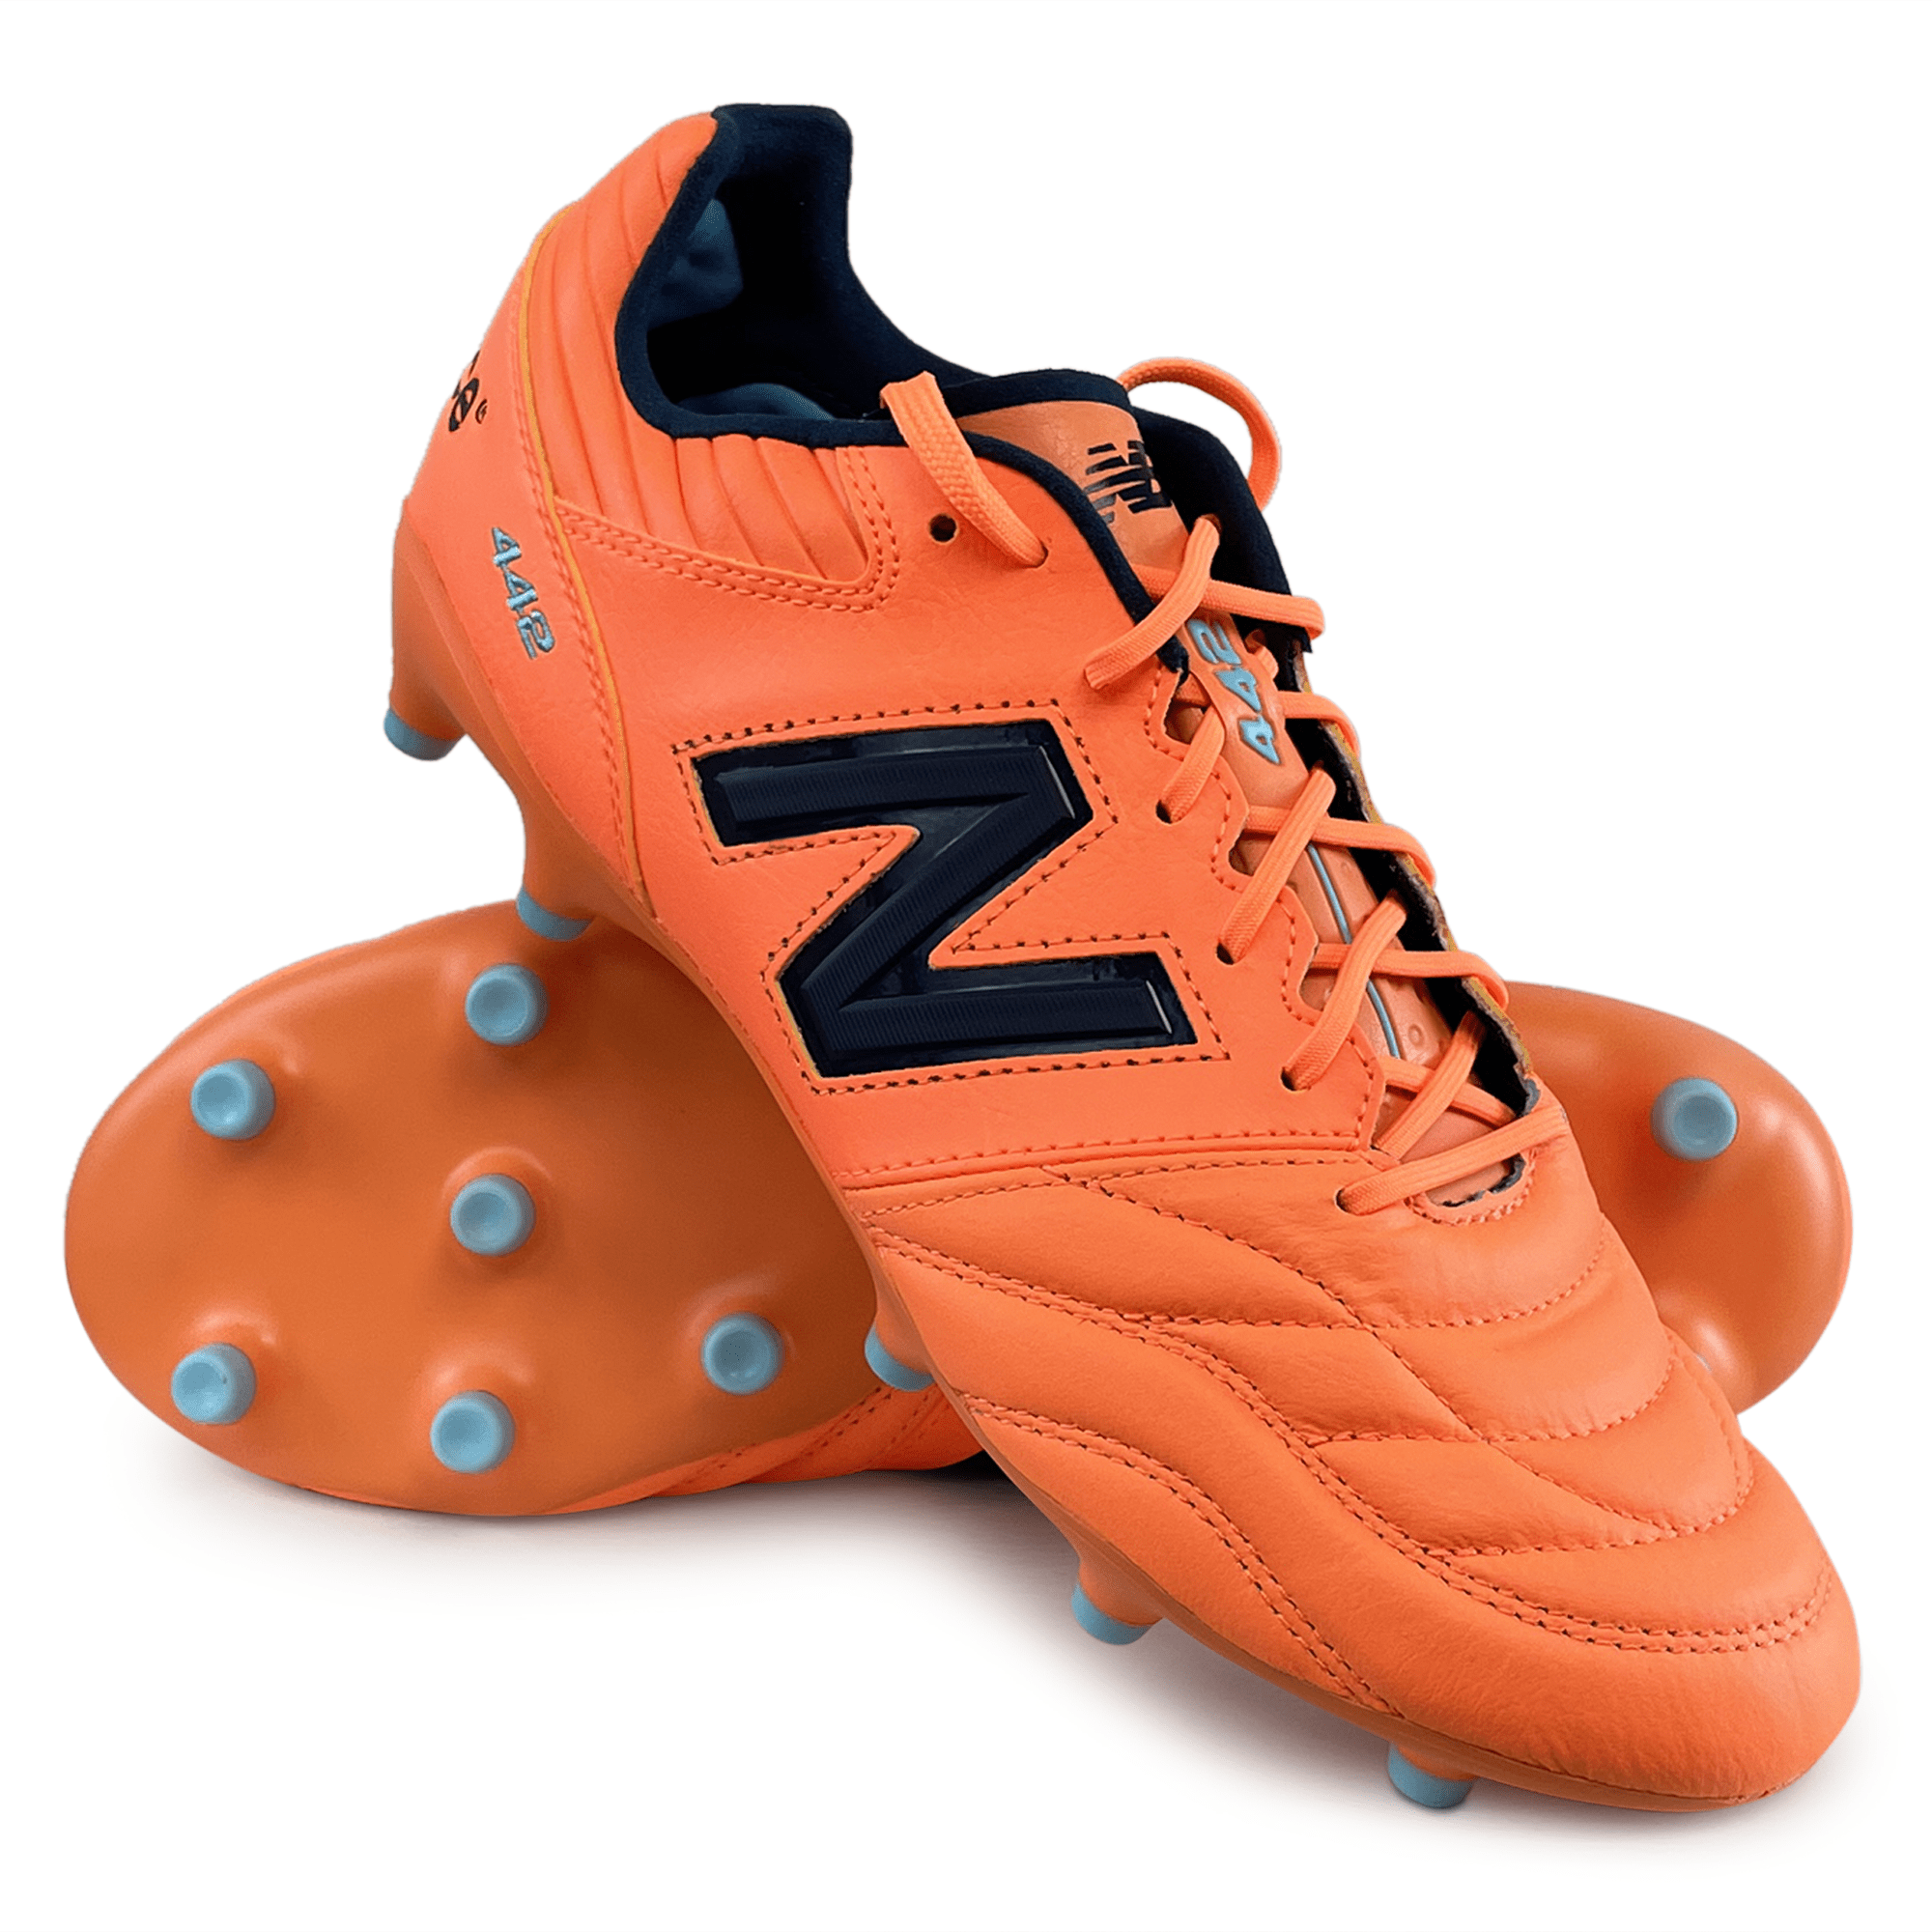 442 v2 Pro FG Wide Boots - Hot Mango by New Balance - World Rugby Shop